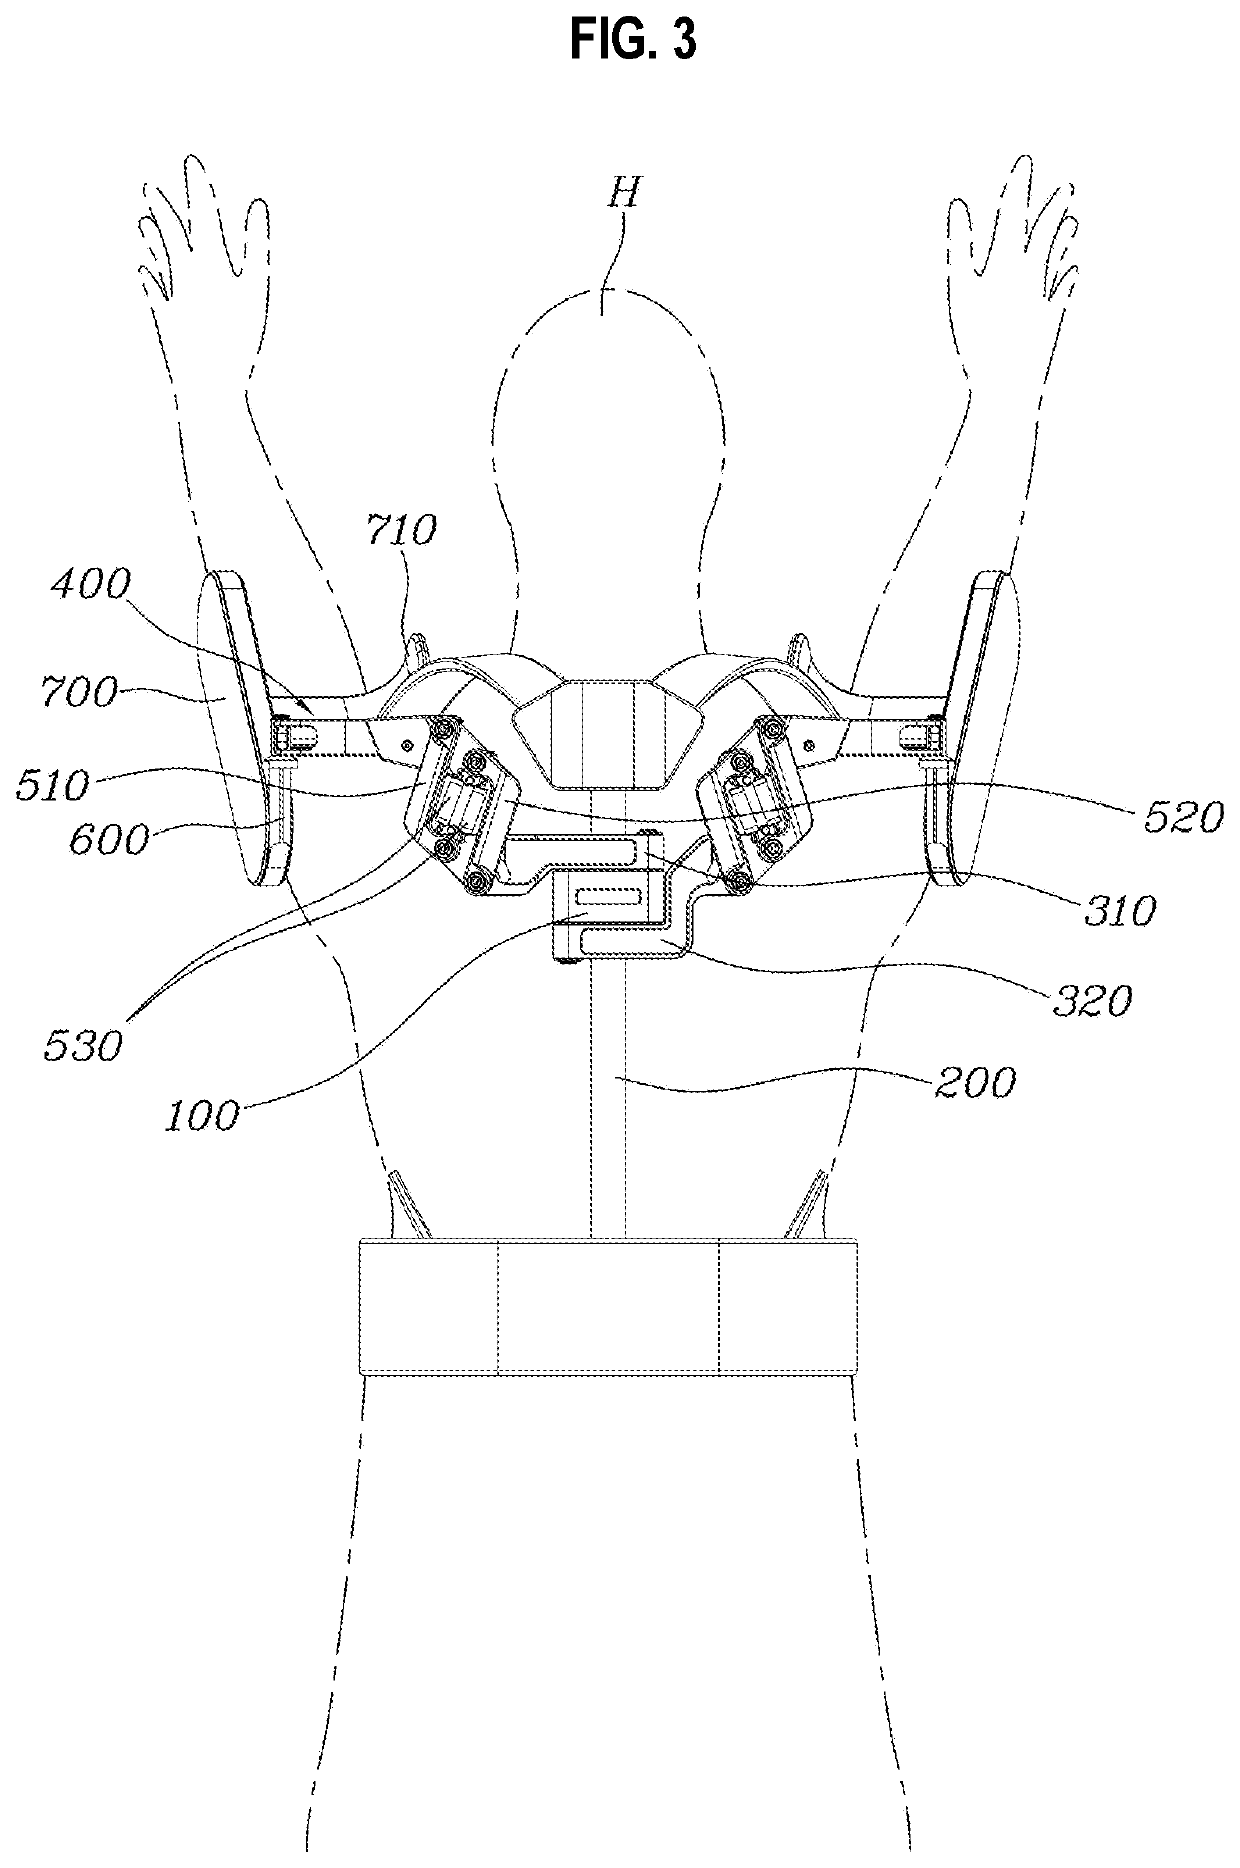 Wearable apparatus for assisting muscular strength